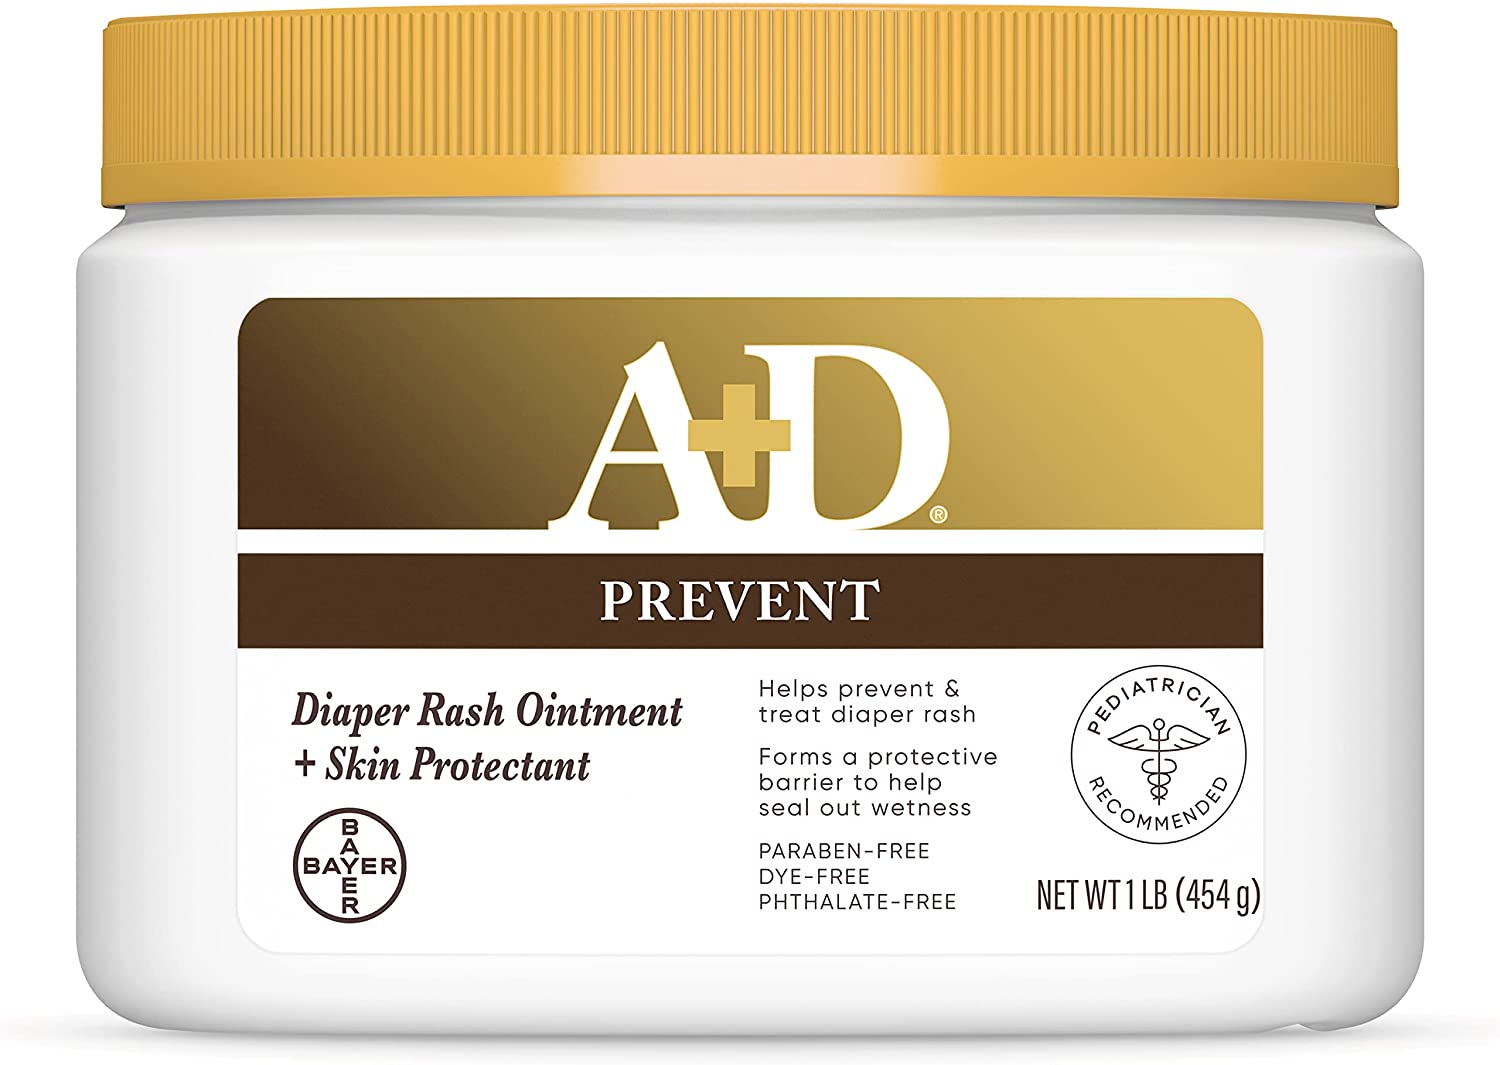 A+D Original Diaper Rash Ointment, Skin Protectant With Lanolin and Petrolatum, (Packaging May Vary) Cream 16 Ounce